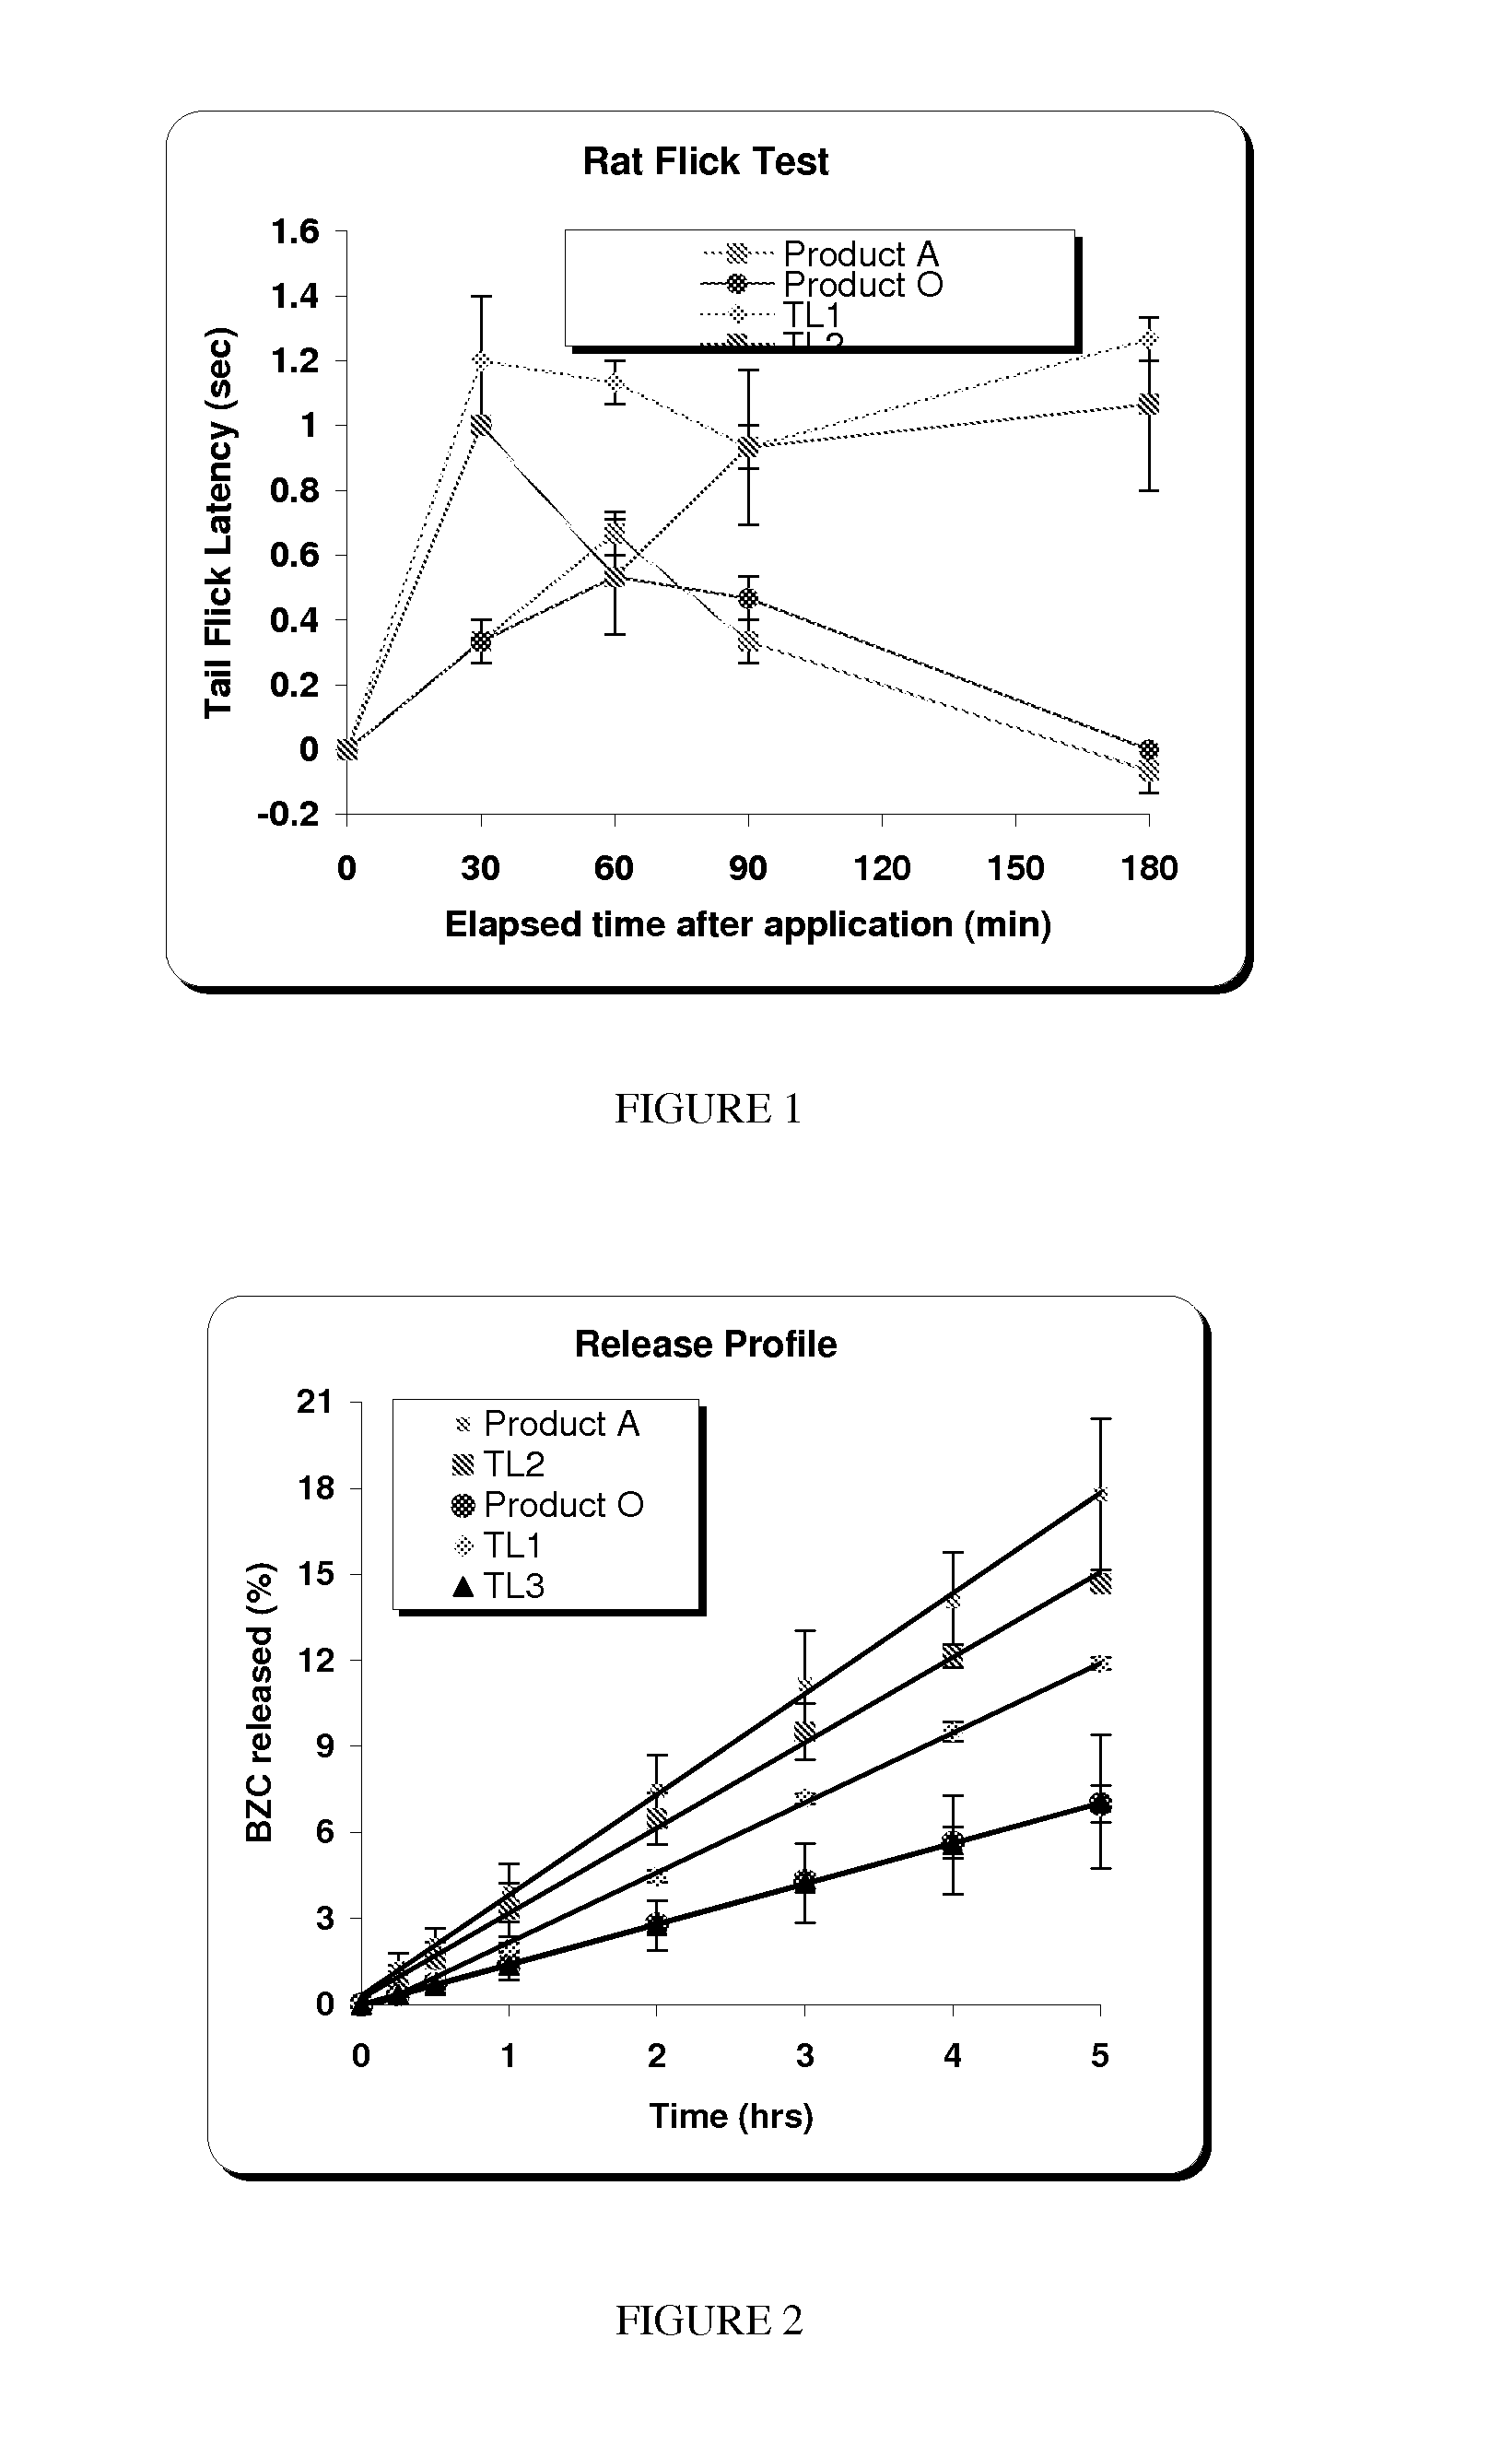 Bioadhesive compositions for epithelial drug delivery